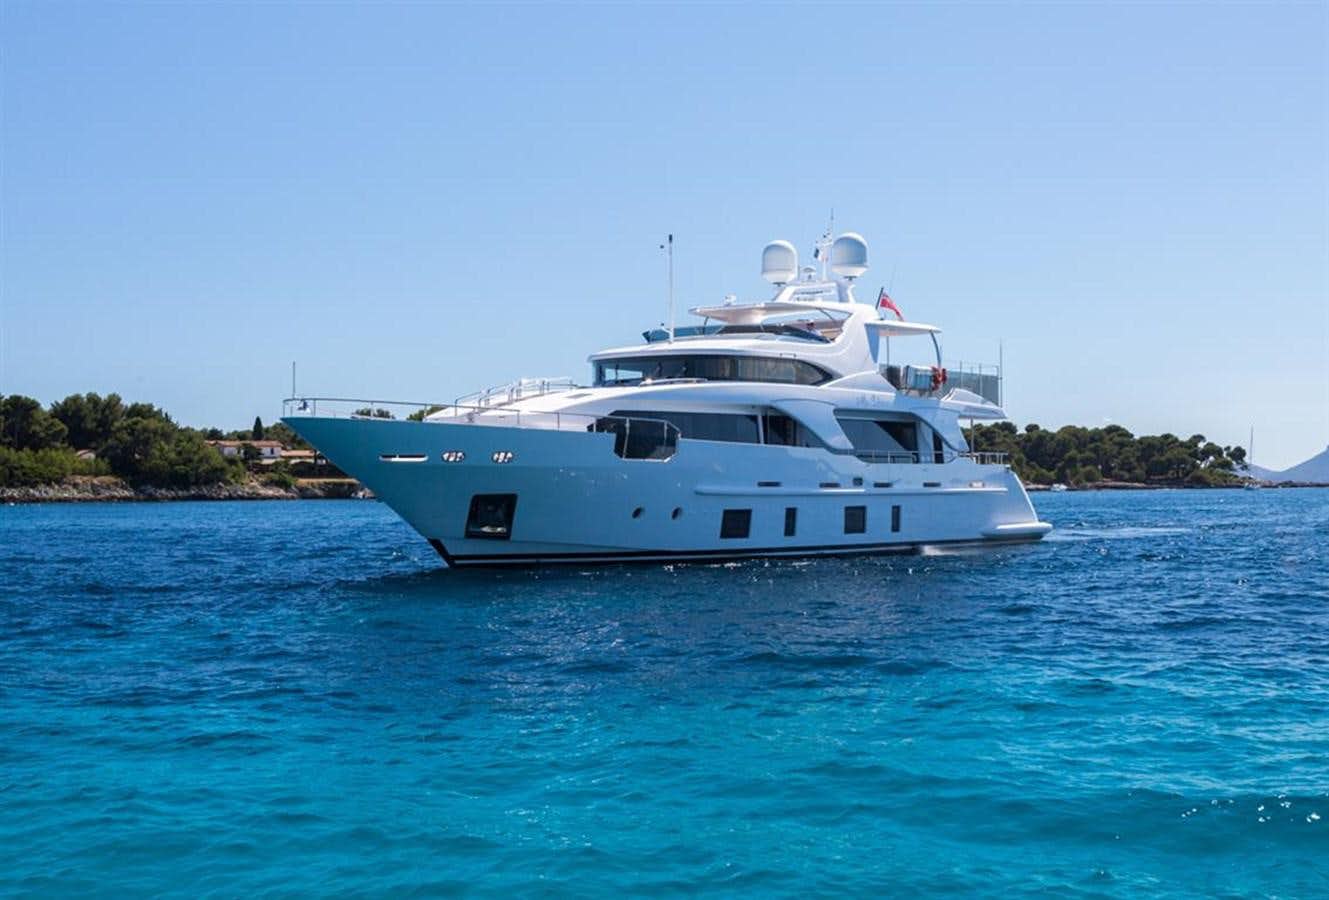 Gala
Yacht for Sale